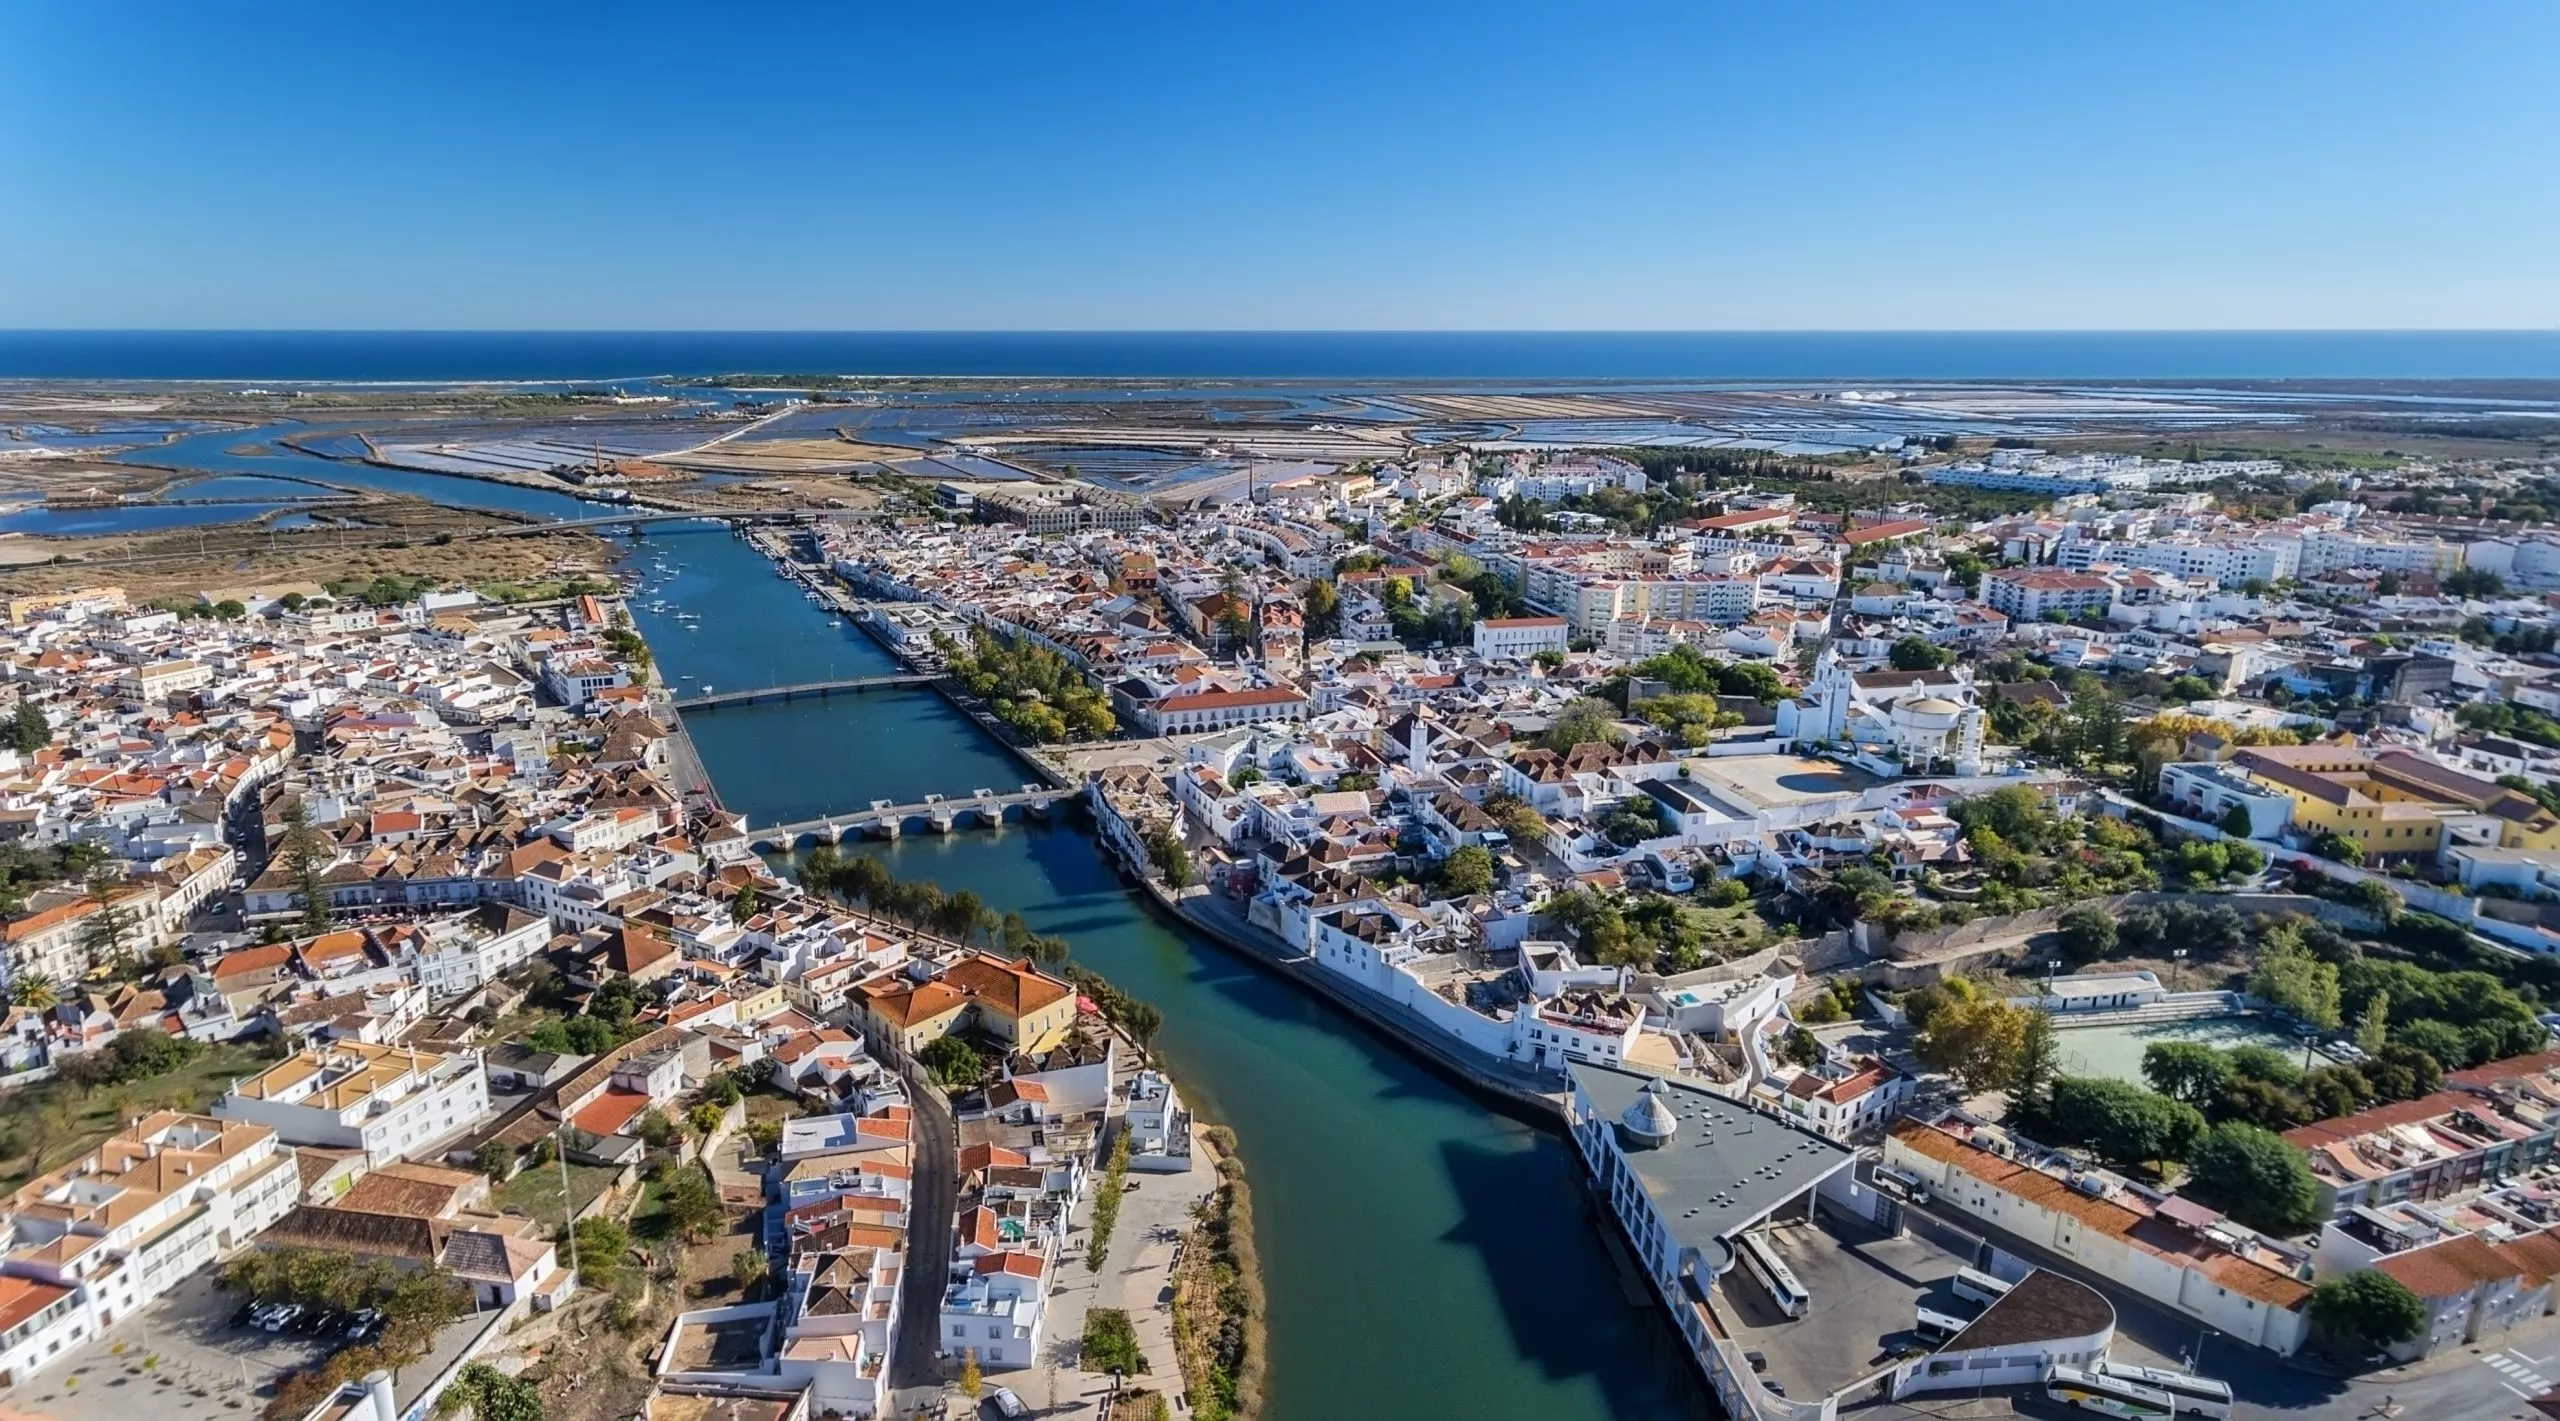 Aerial. The Gilao River and bridges in city of Tavira.